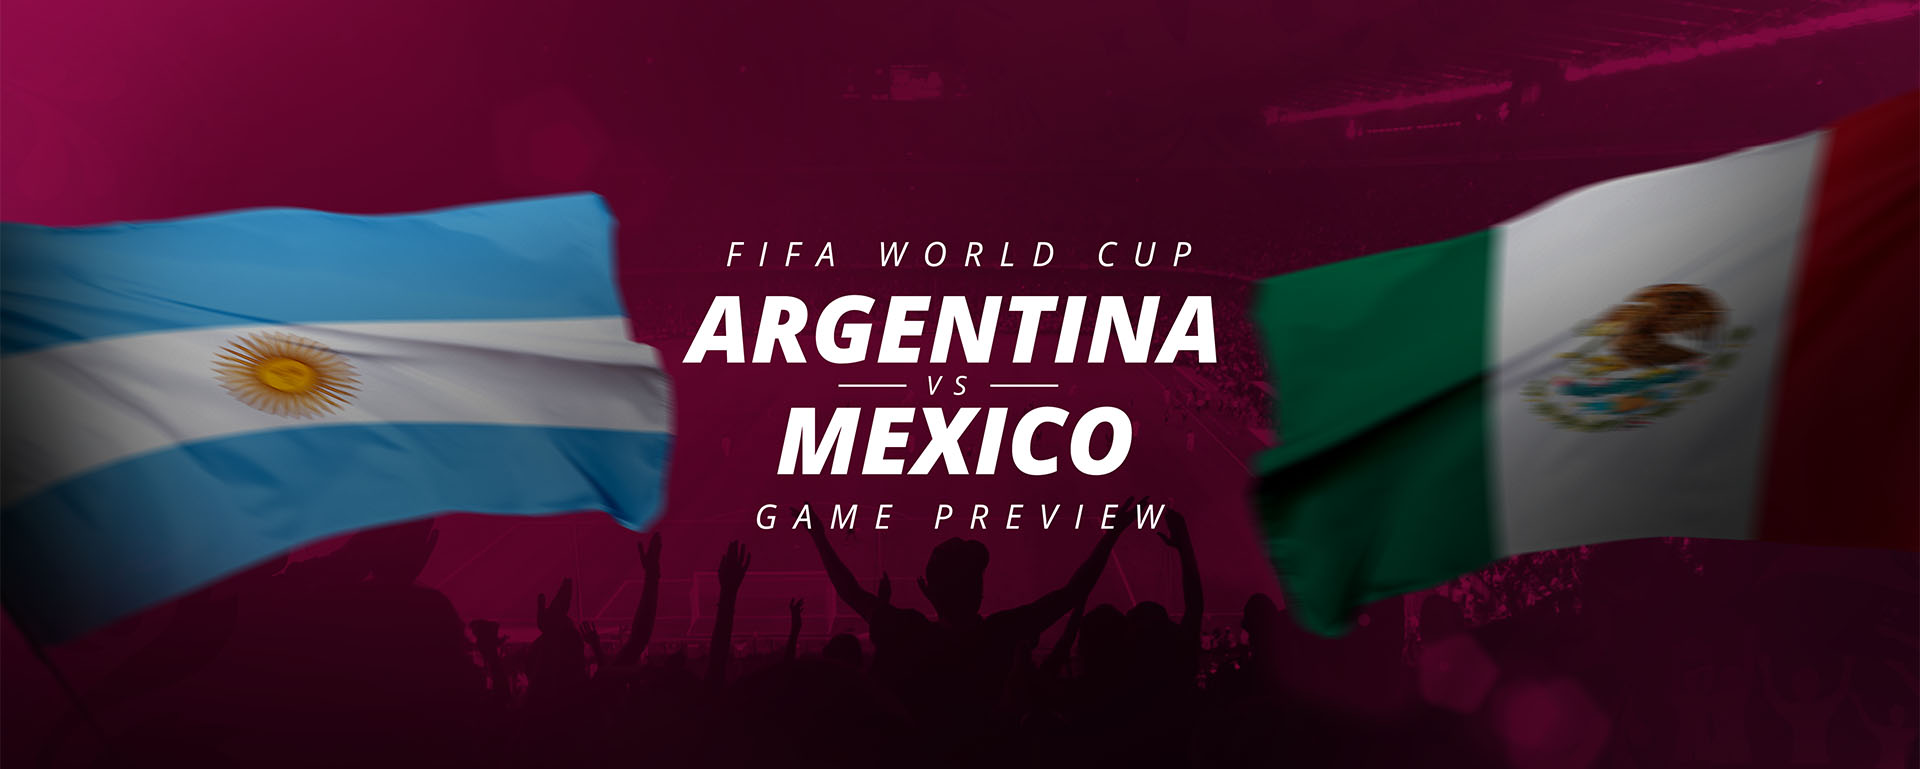 FIFA WORLD CUP: ARGENTINA V MEXICO – GAME PREVIEW